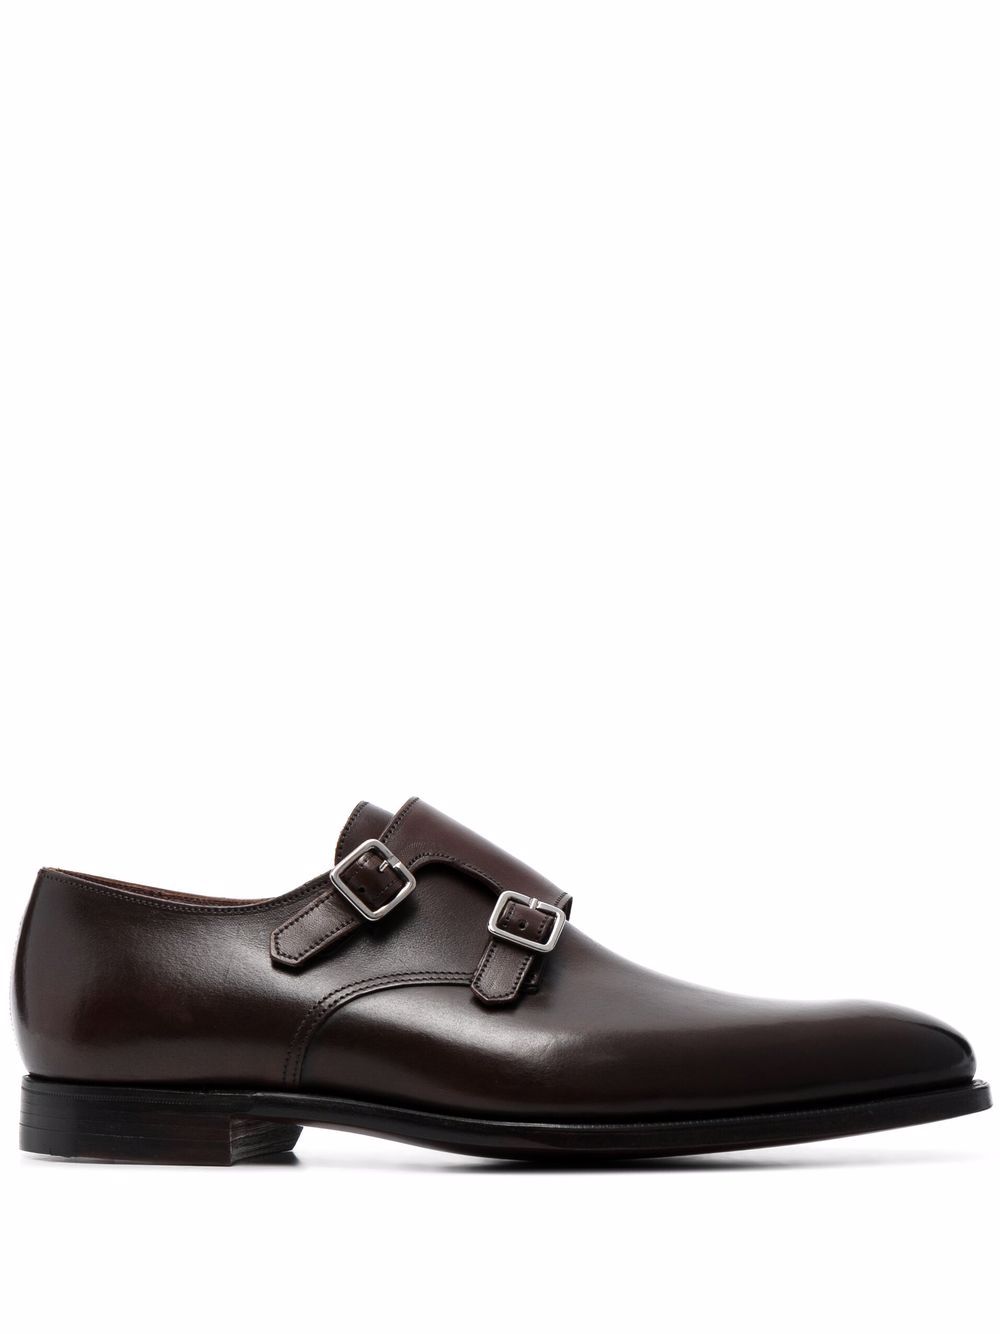 Seymour double buckle shoes